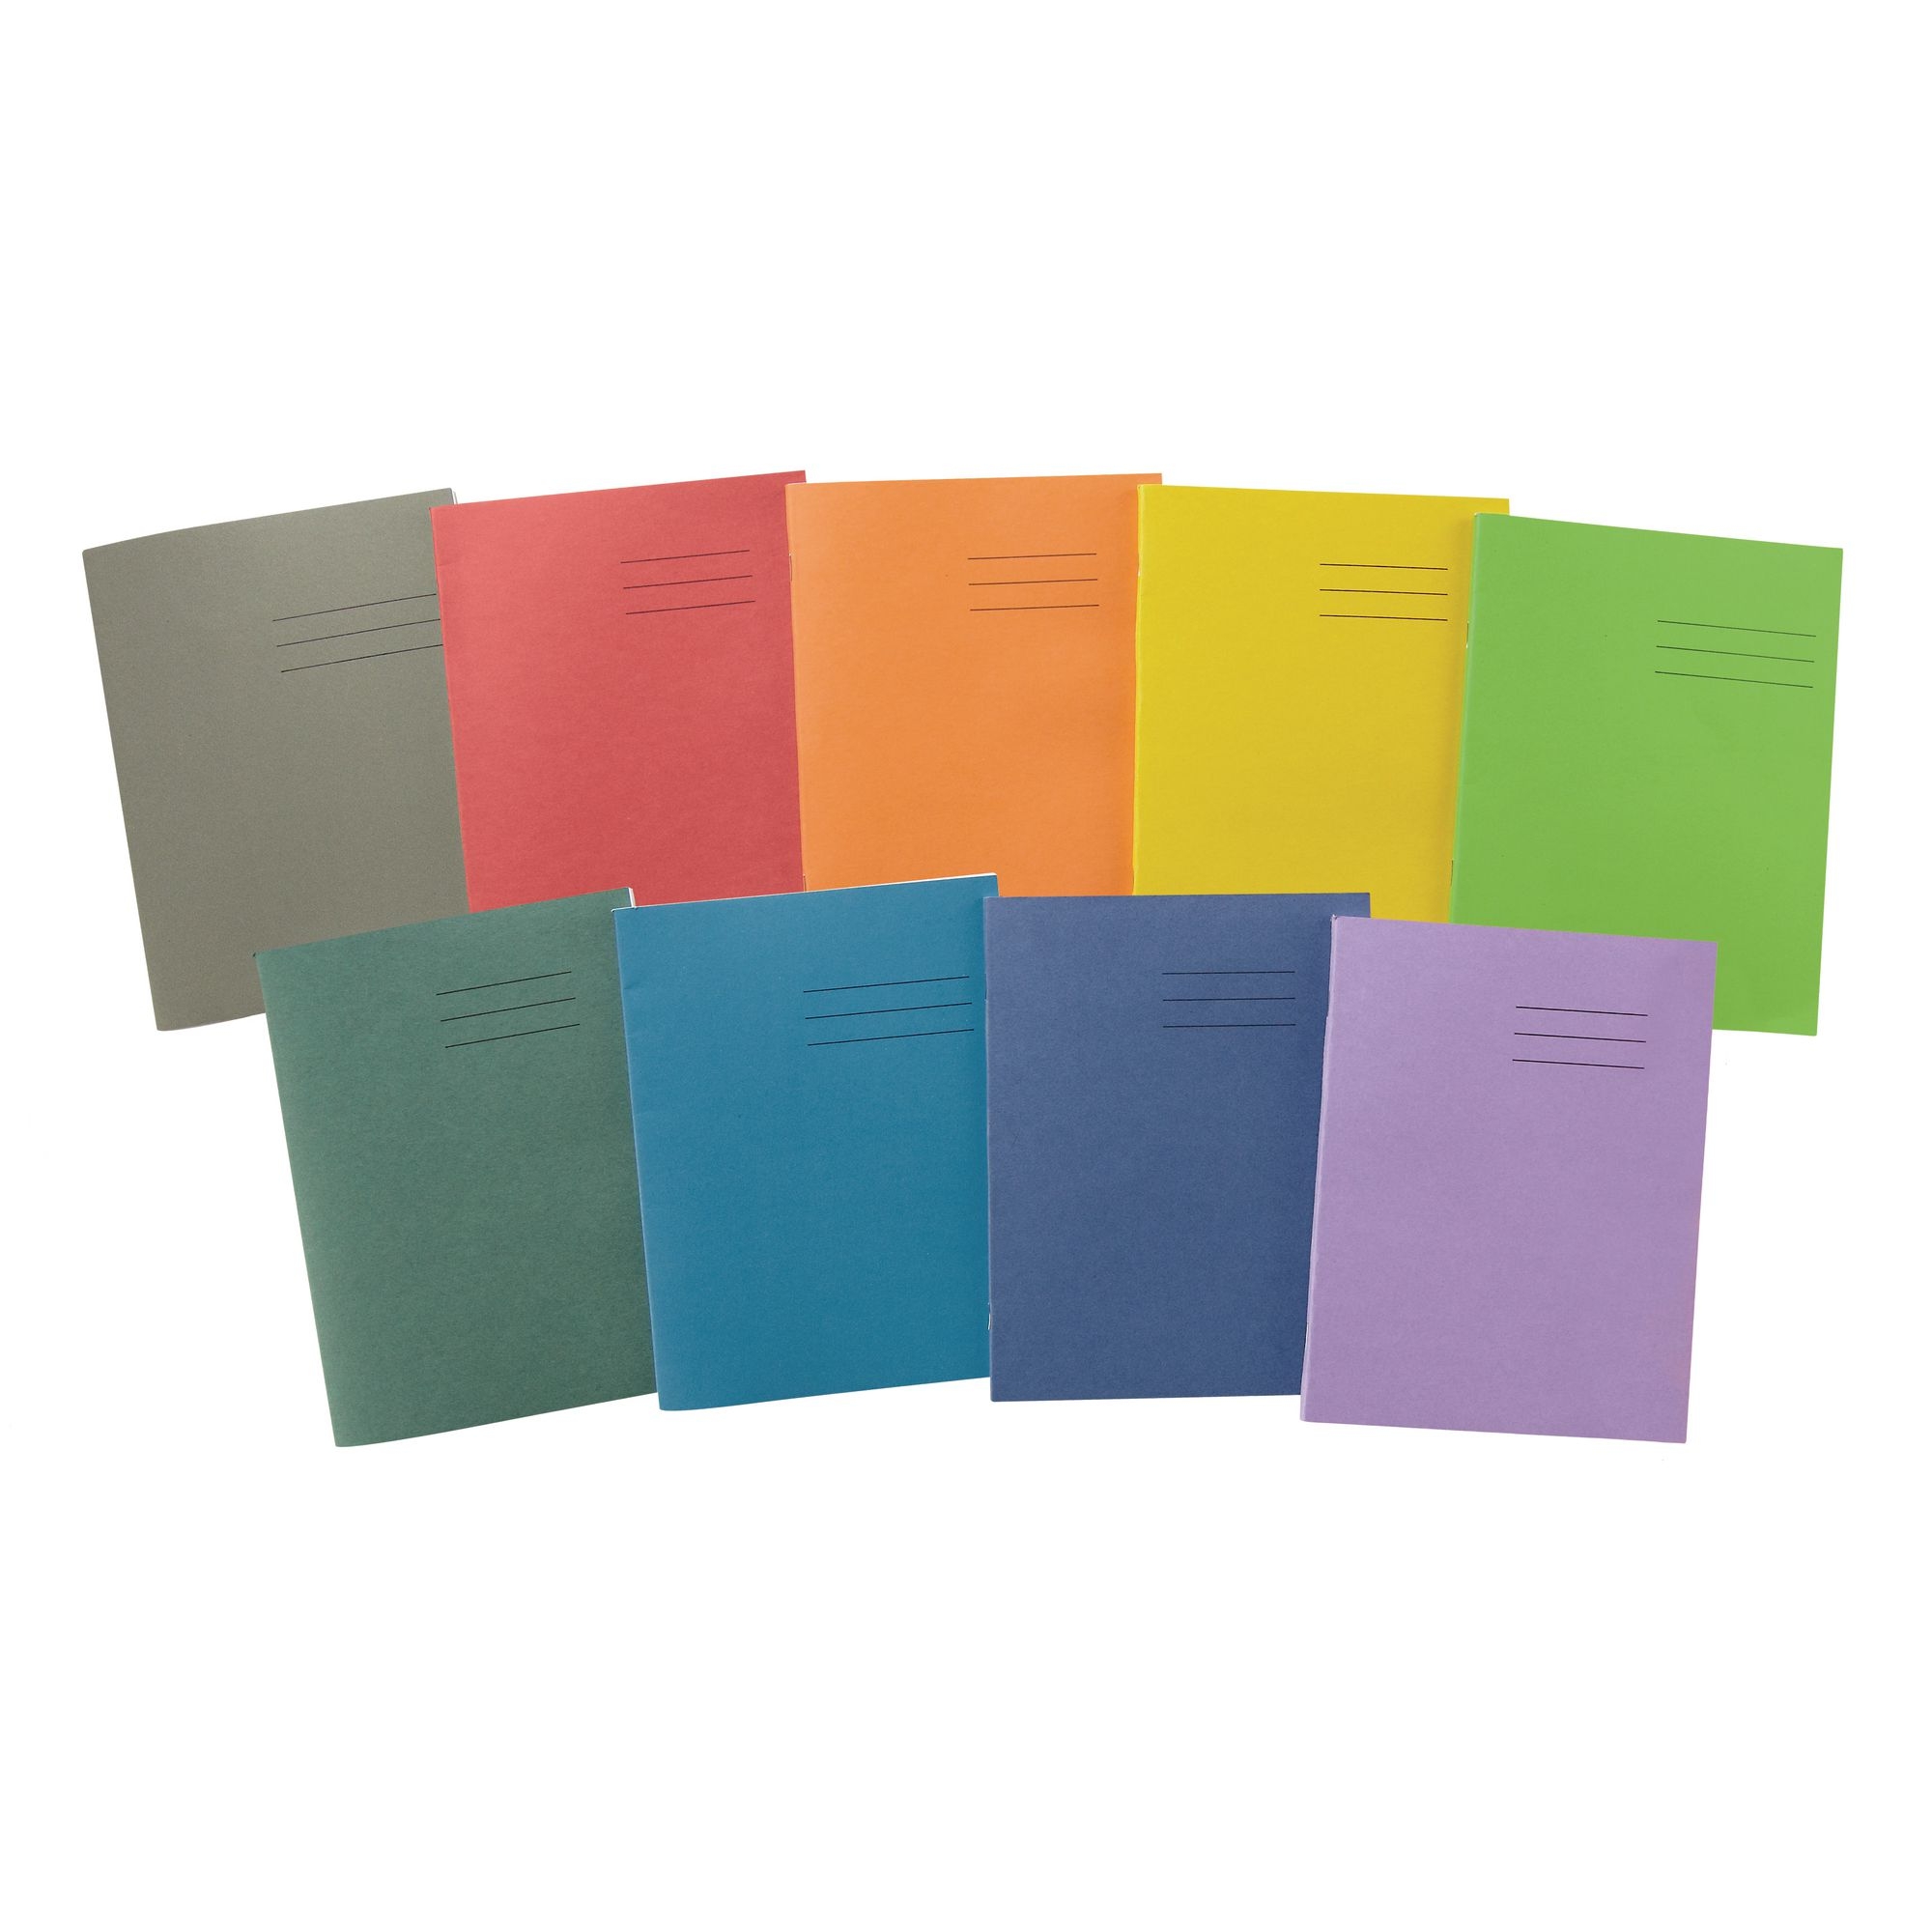 Vivid Red 9x7" Exercise Book 48-Page, 8mm Ruled With Margin - Pack of 100